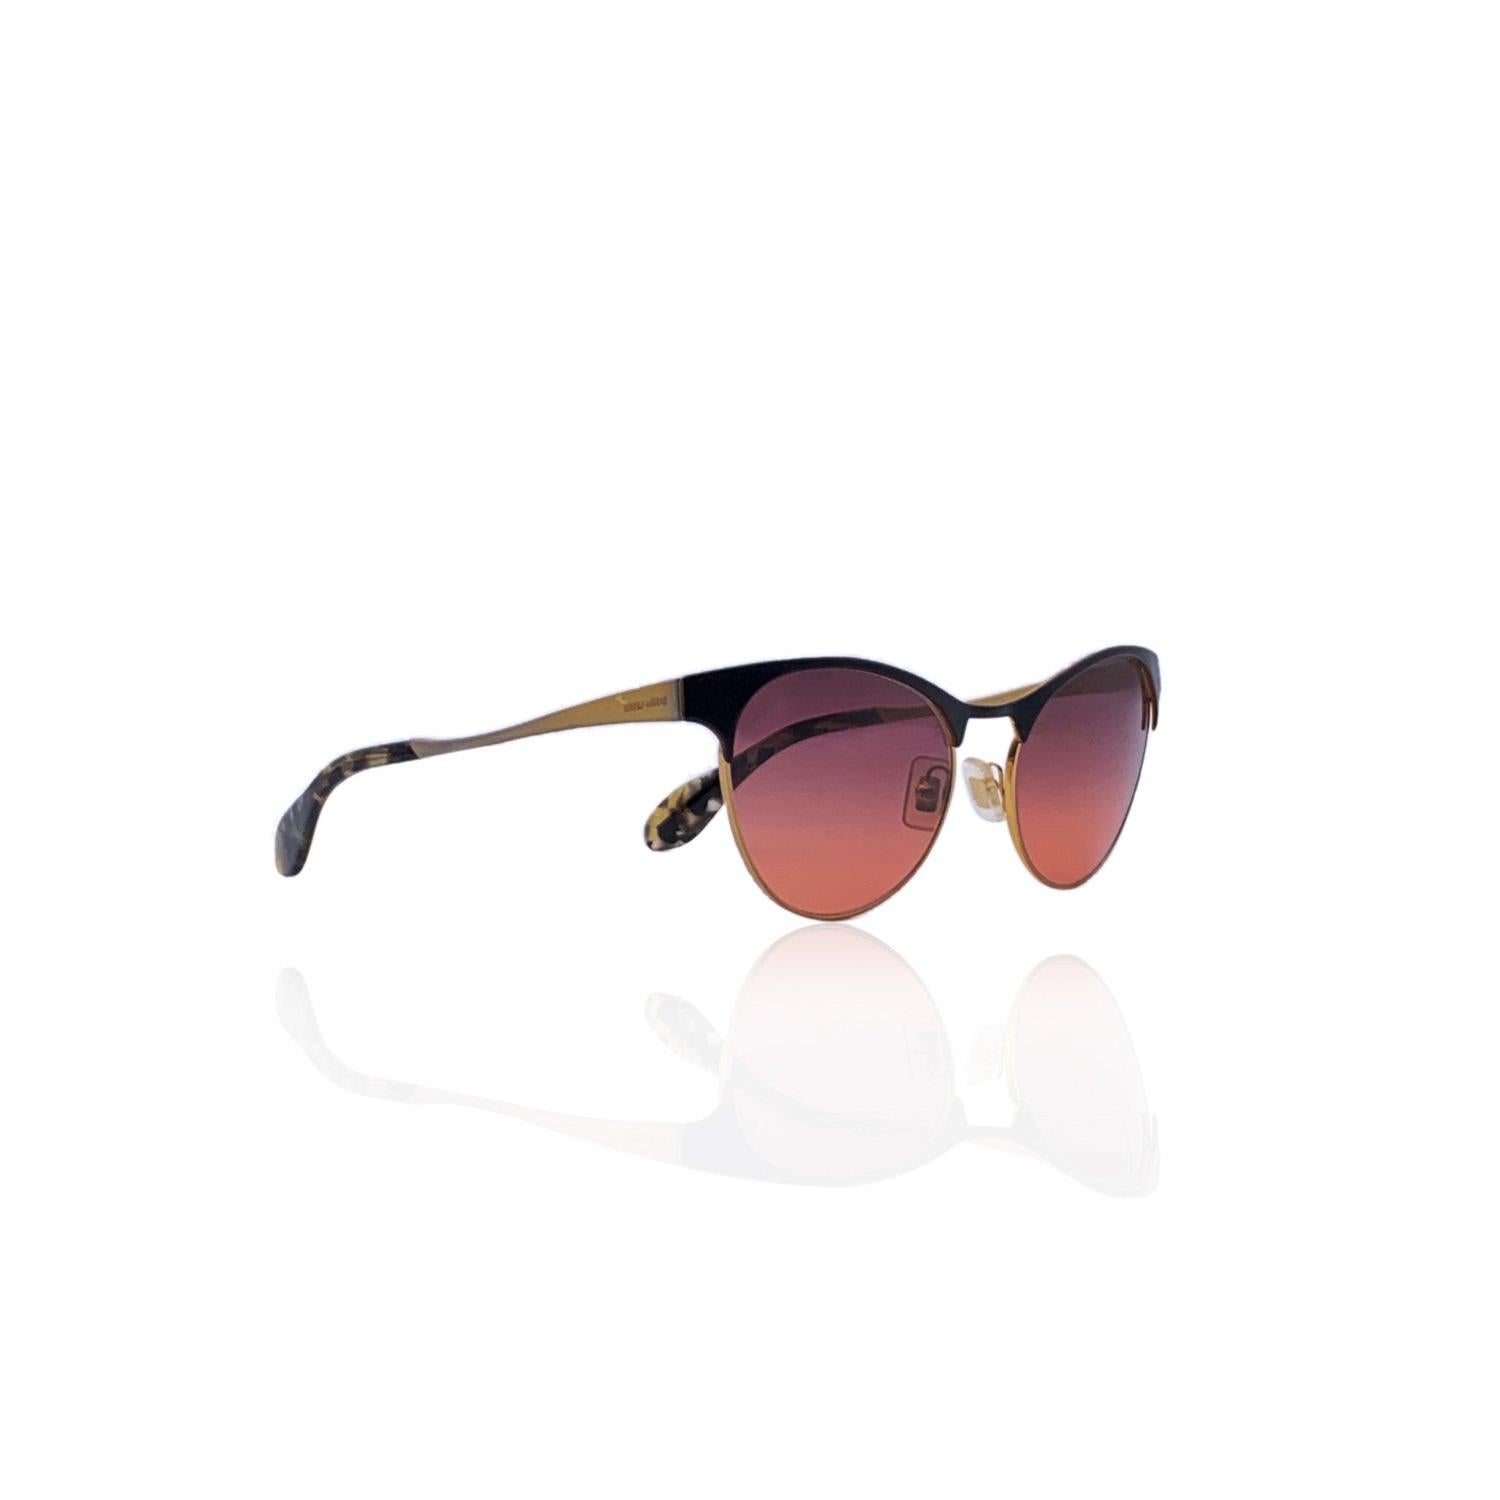 Beautiful sunglasses by Miu MIu, mod. SMU 50 - col.NAL-0A7. Cat- eye shape in black and gold colors. Logo on the temples and gradient purple/pink lenses. Mod & refs.: mod. SMU 50 - col.NAL-0A7 - 54/18 - 140 - 2N. Made in Italy Details MATERIAL: